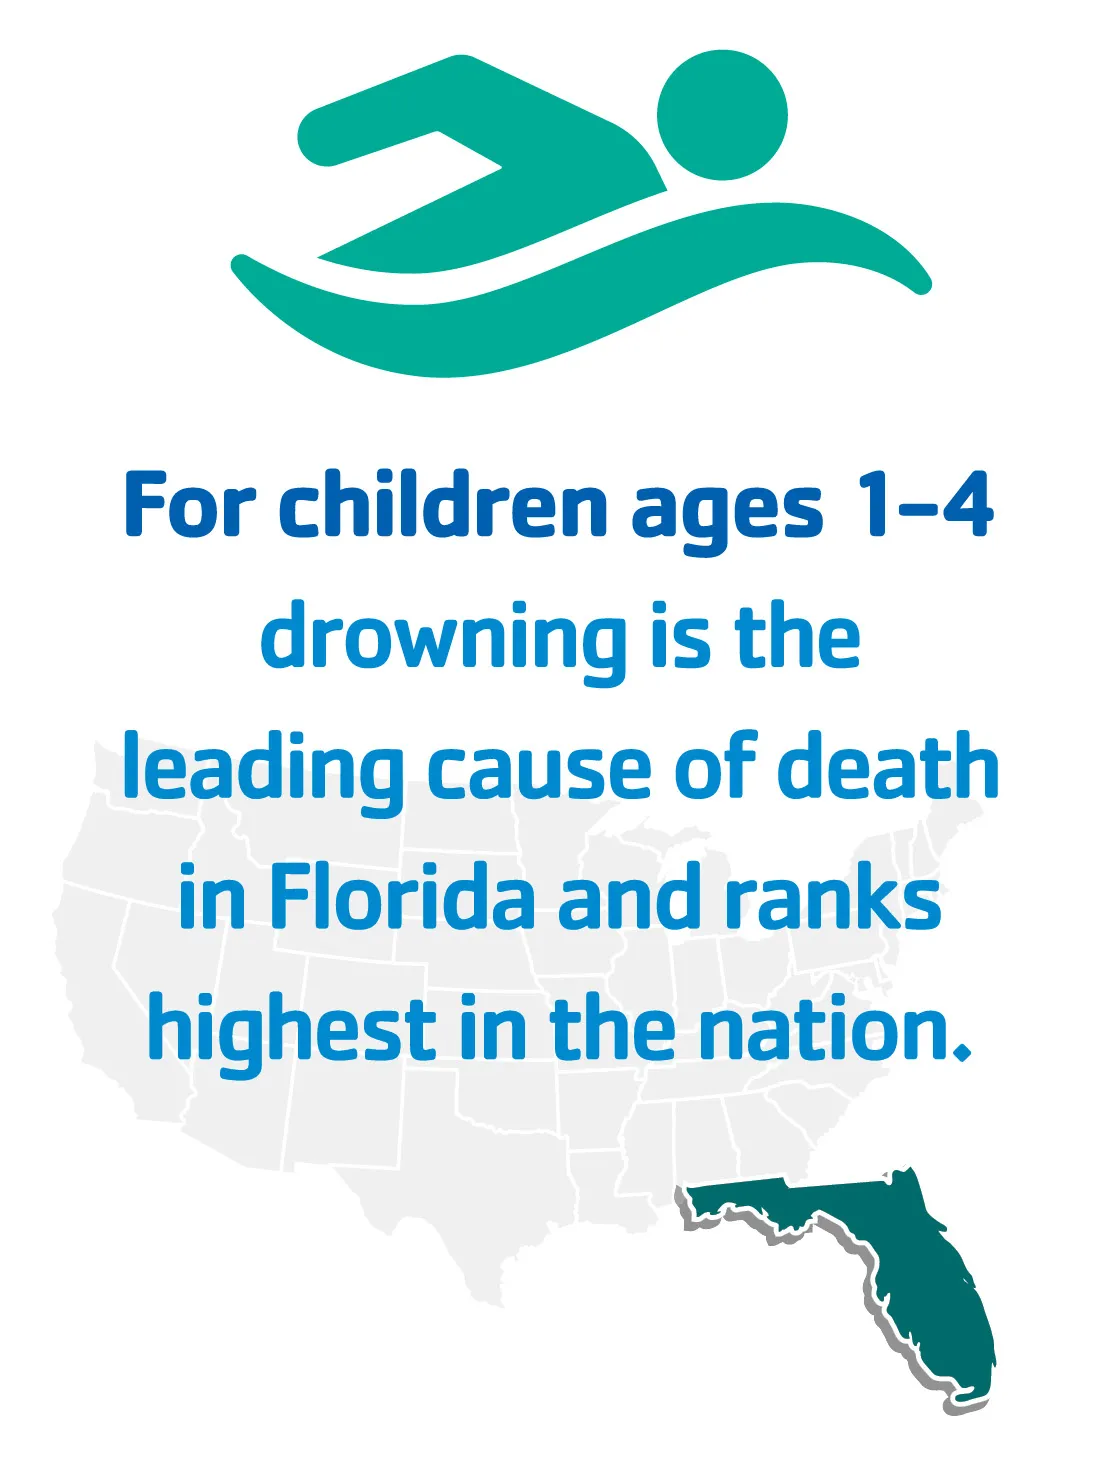 For children ages 1 to 4 drowning is the leading cause of death in Florida and ranks highest in the nation